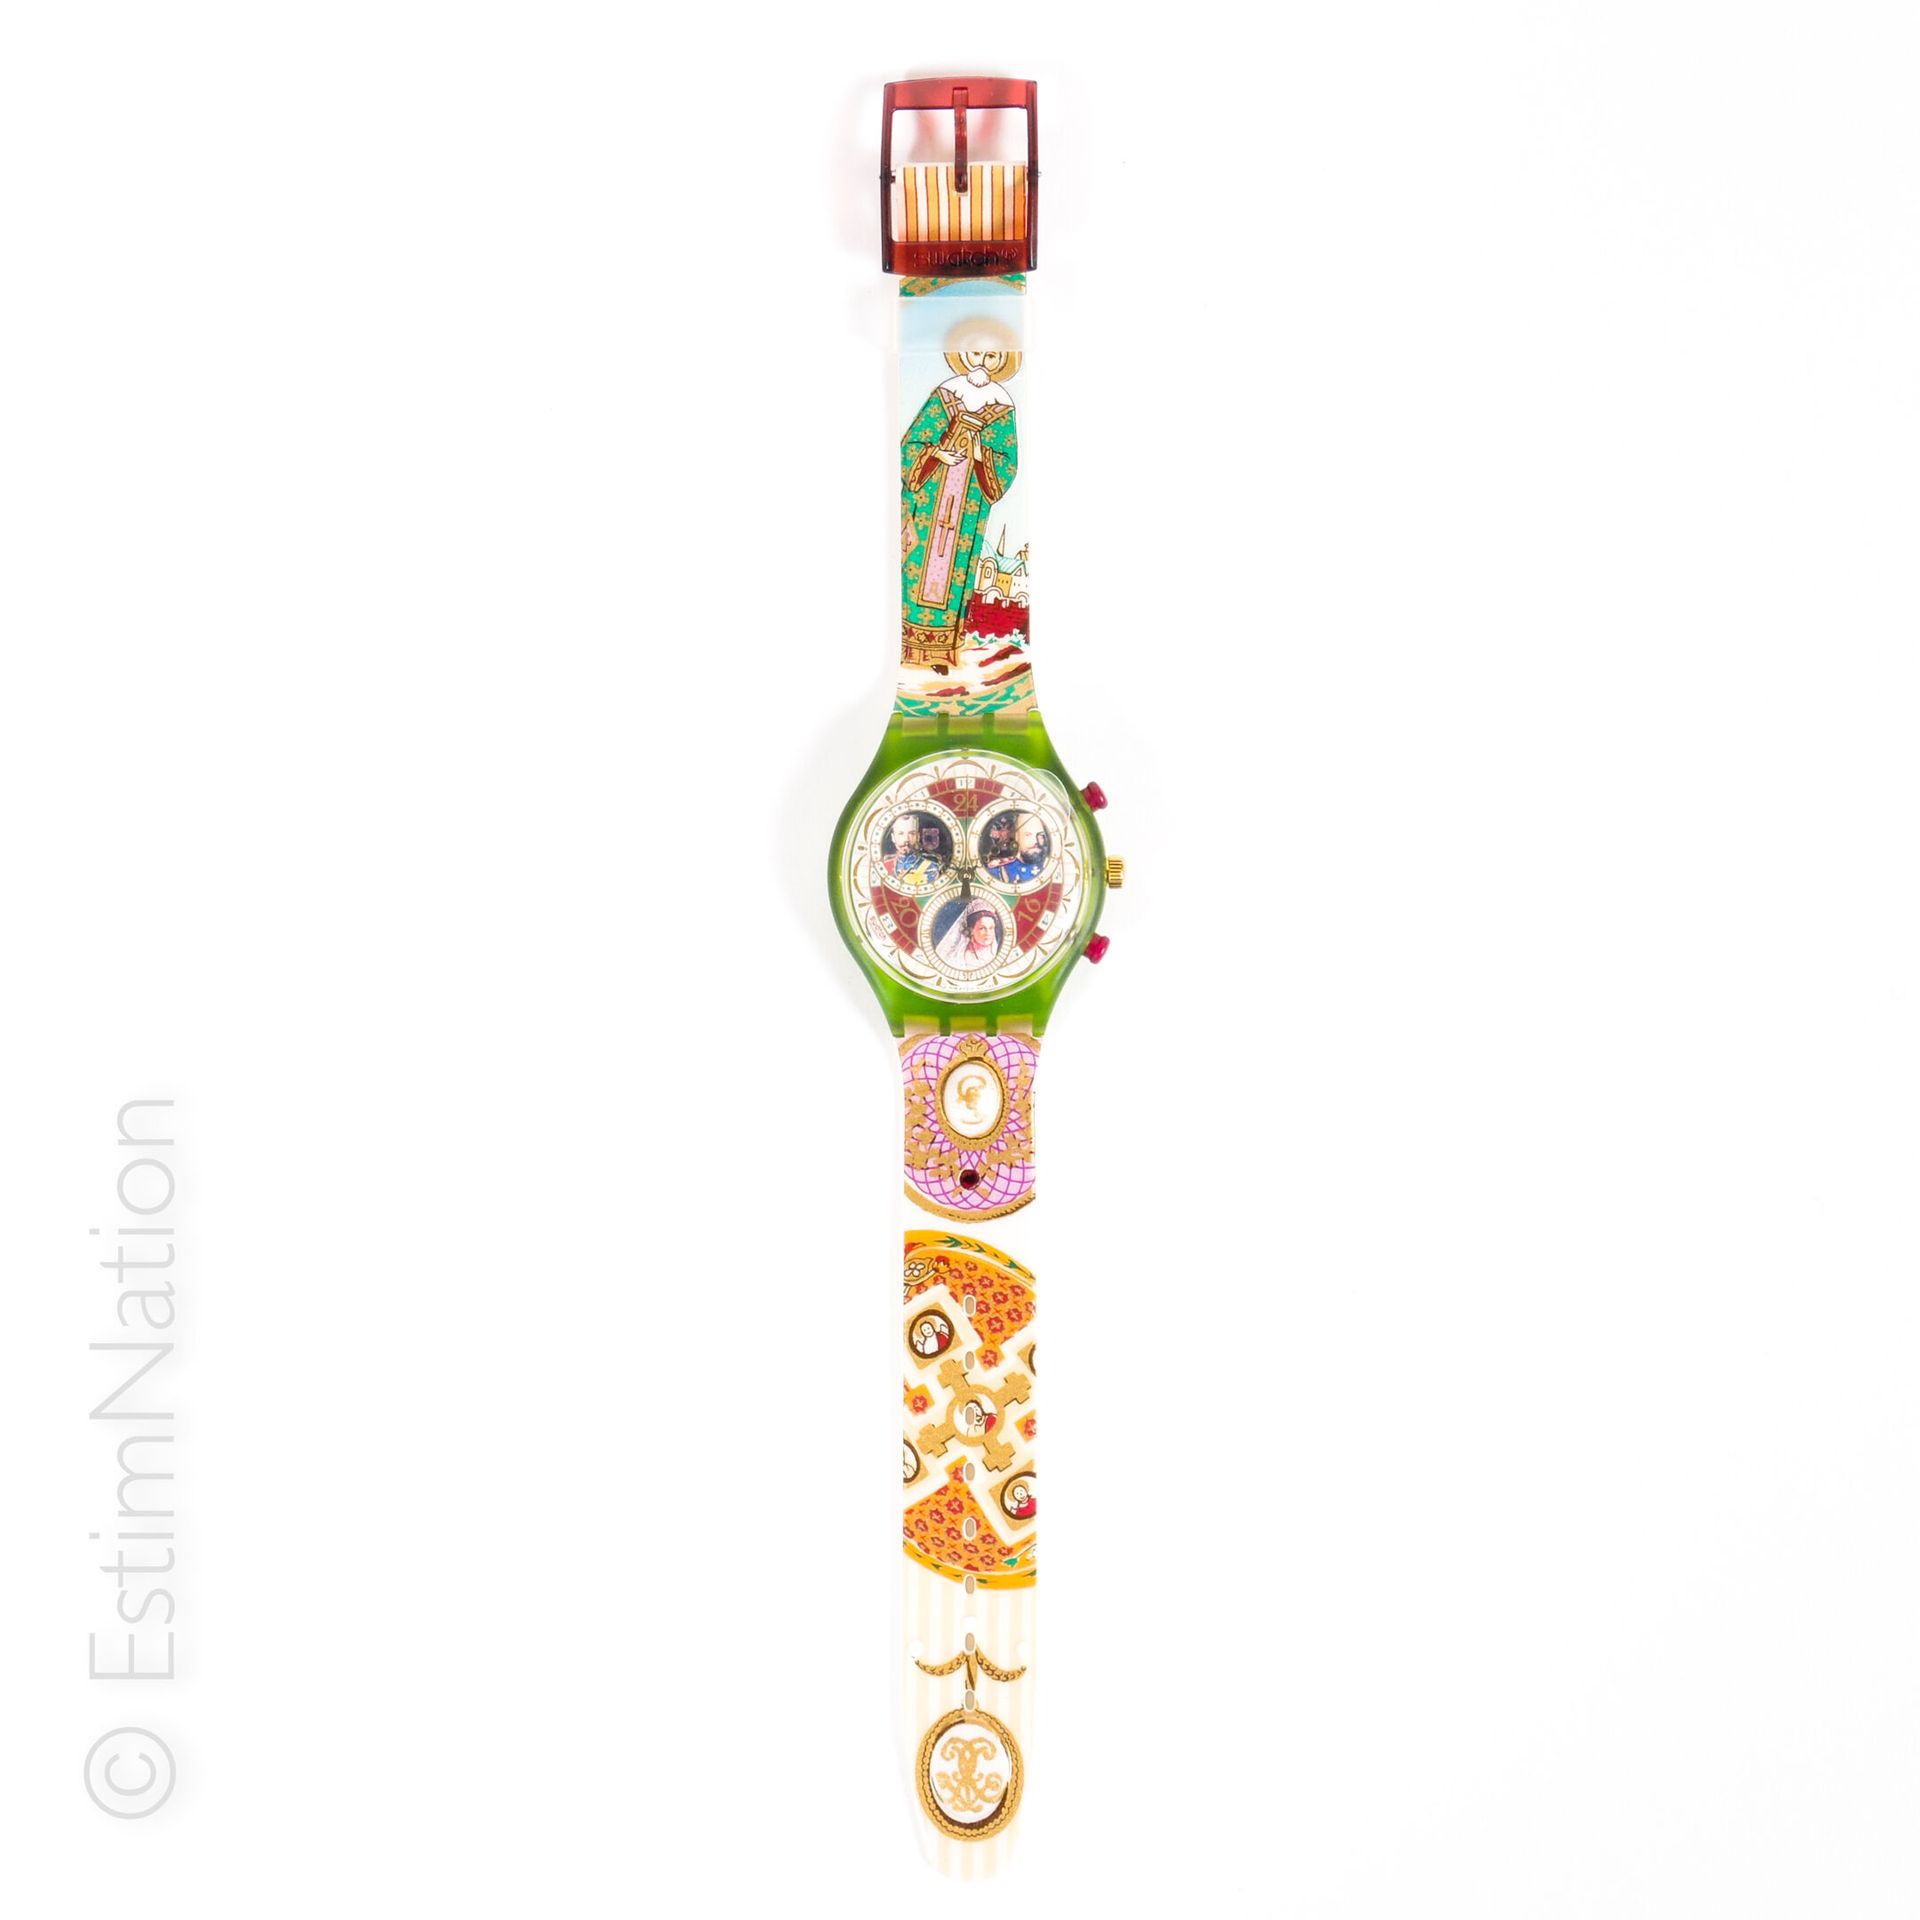 SWATCH - RUSSIAN TREASURY - 1995 SWATCH - RUSSIAN TREASURY

Plastic Collection: &hellip;